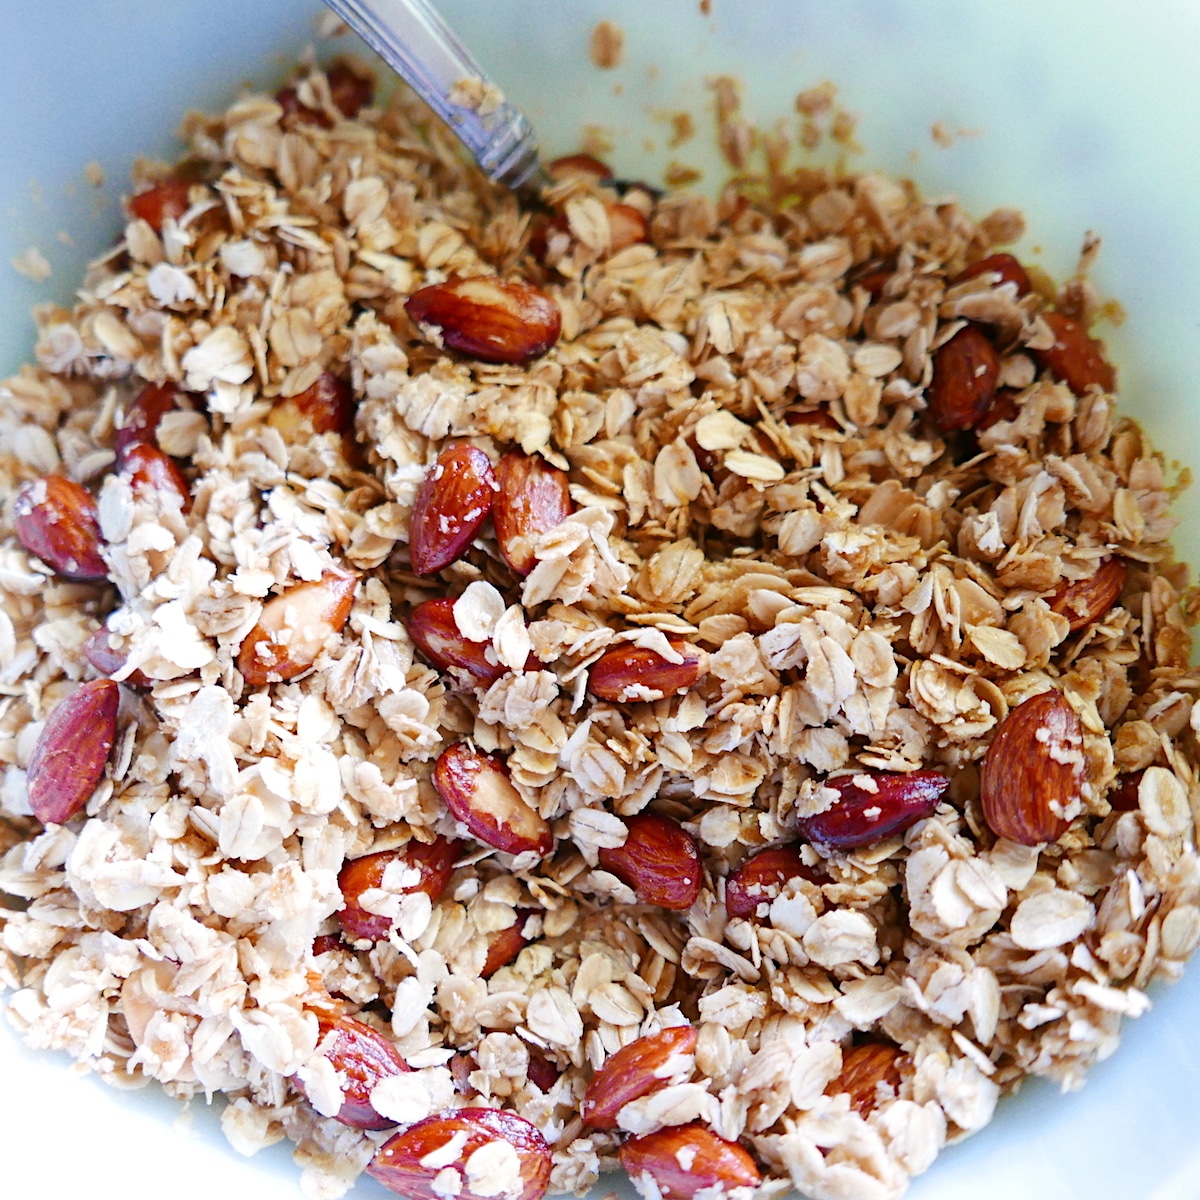 Mixing the oats, nuts, coconut, and brown sugar in a large bowl.